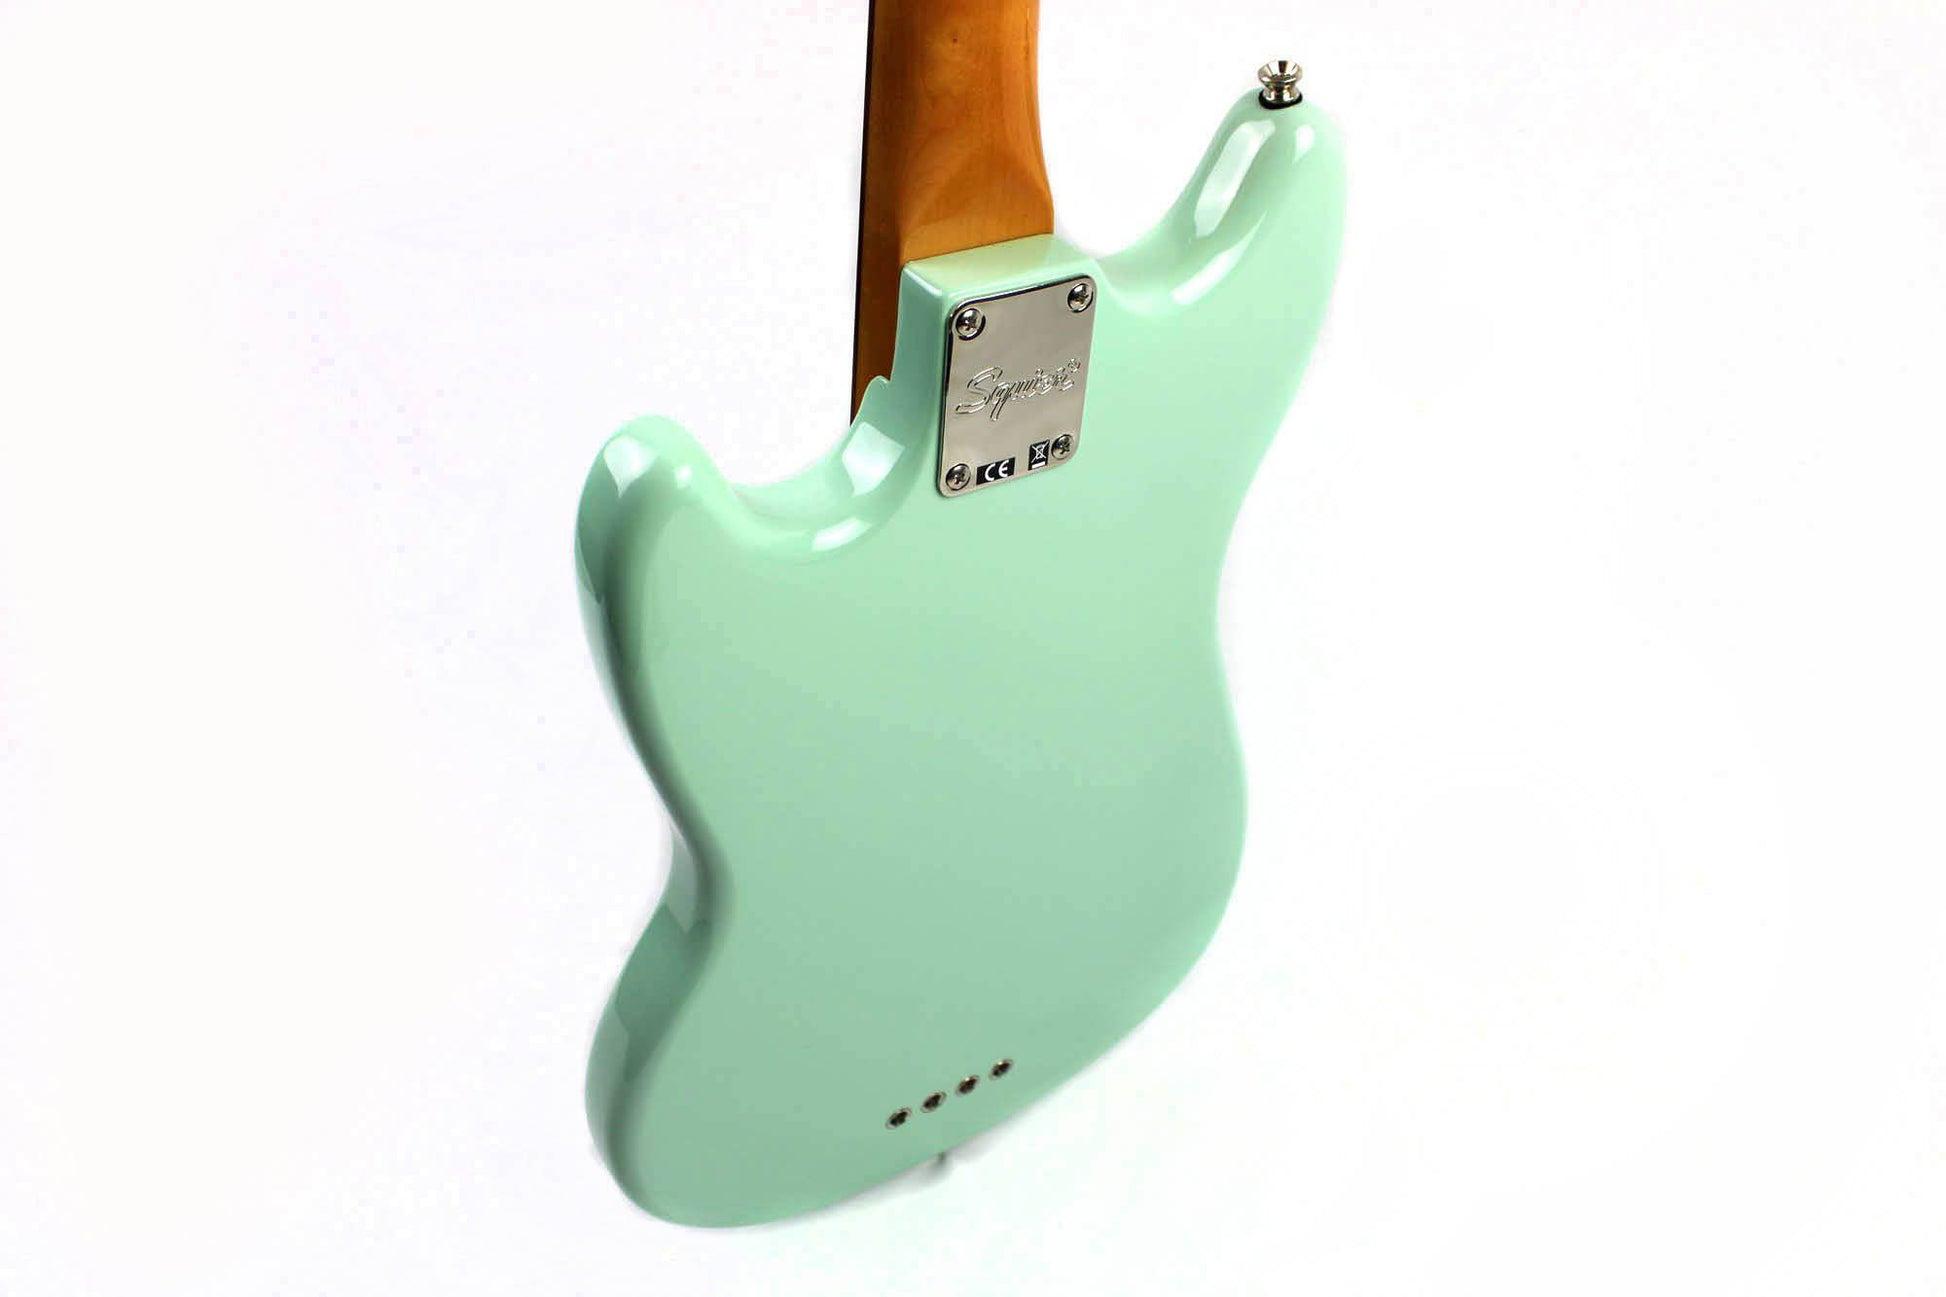 Squier Classic Vibe '60s Mustang Bass - Surf Green - Leitz Music-885978064809-0374570557